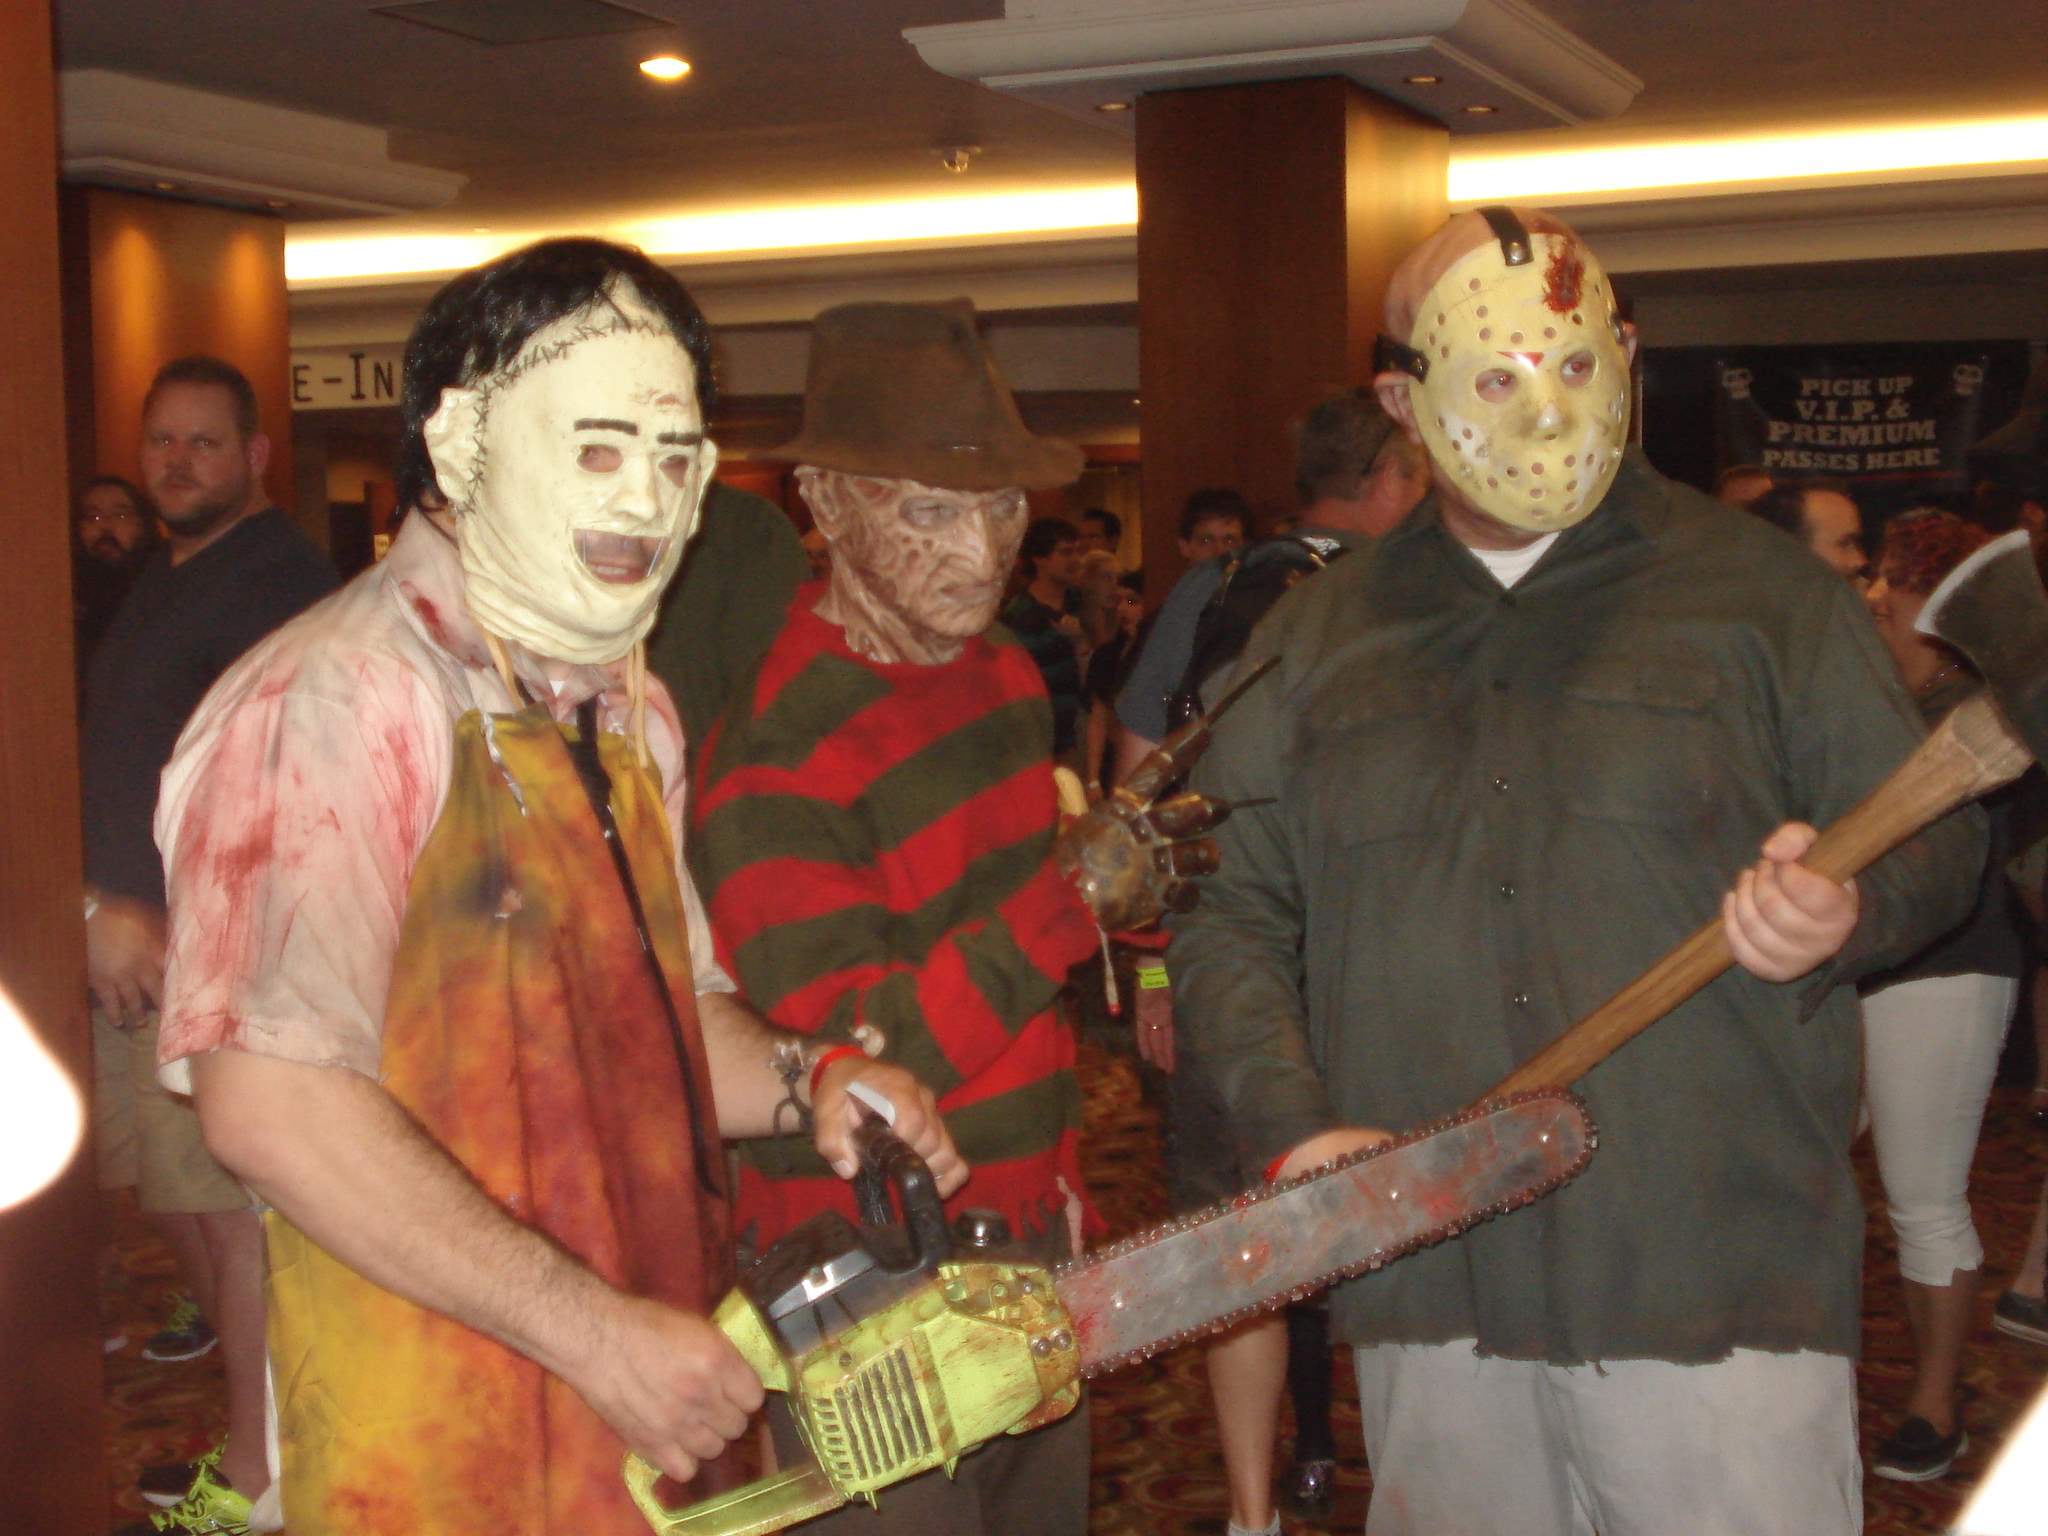 Cosplayers dressed as Leatherface, Freddy Krueger, and Jason Voorhees pose for pictures at Texas Frightmare Weekend